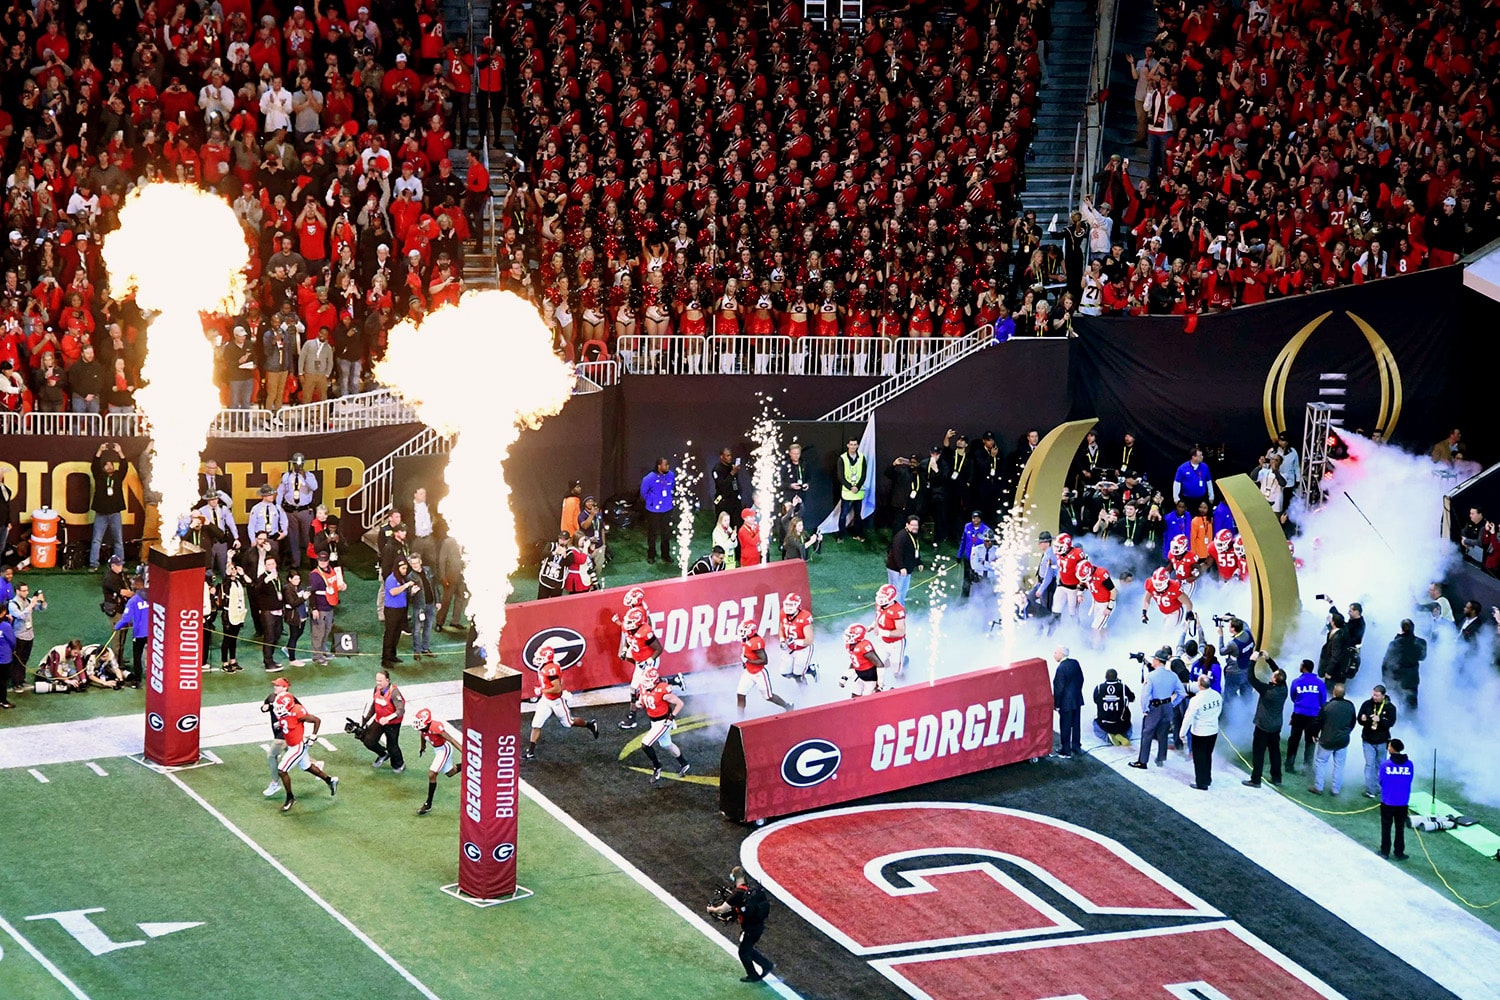 A view of the University of Georgia Bulldogs as they enter the field.